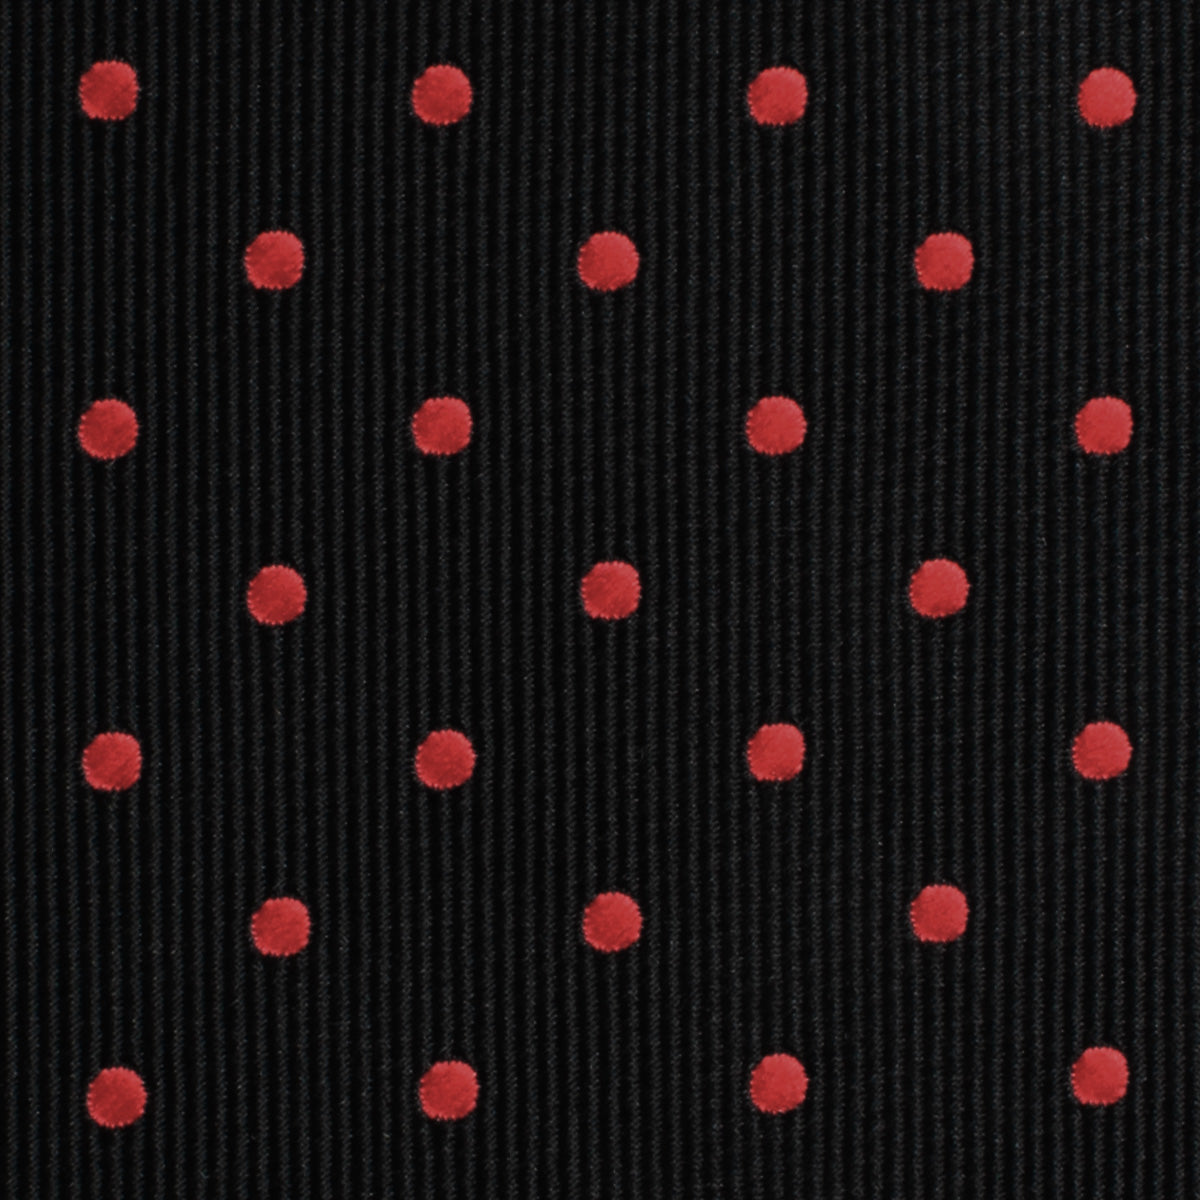 Black with Red Polka Dots Necktie Fabric